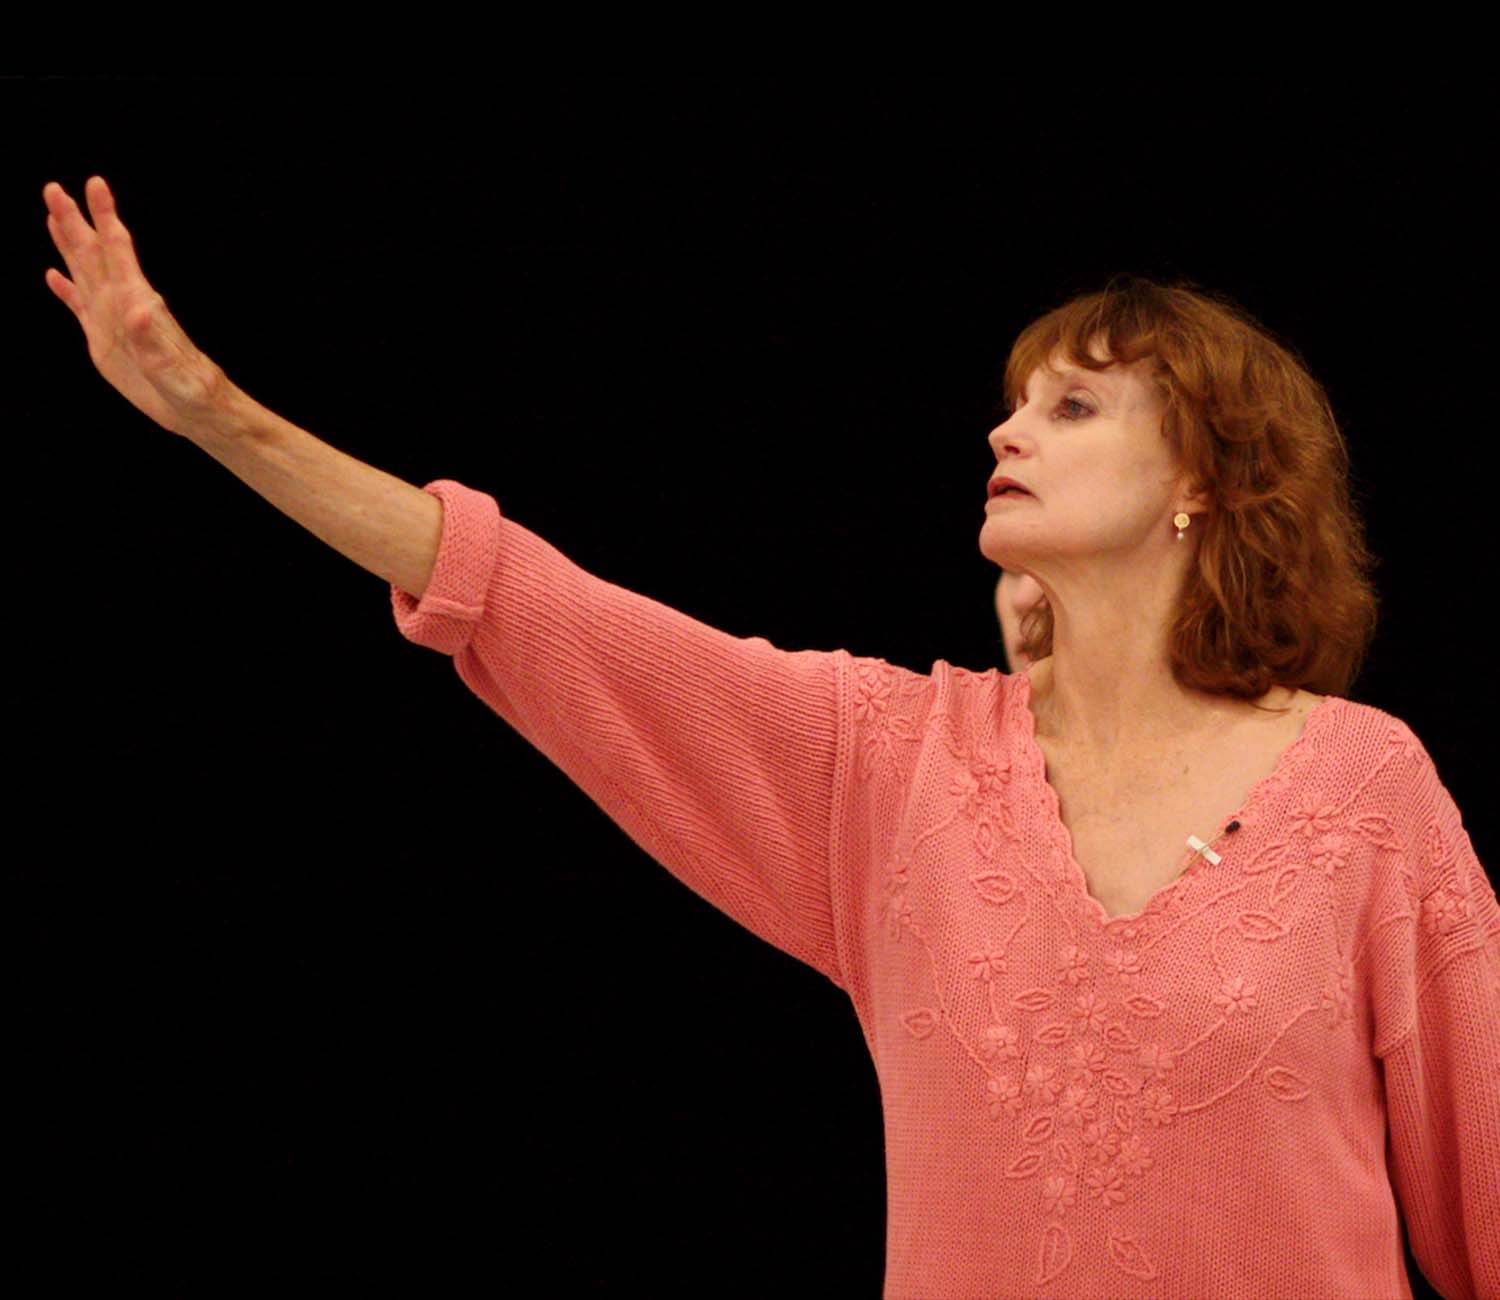 Suzanne Farrell in a decorative coral sweater looking towards her outstretched arm in a coaching session for Meditation